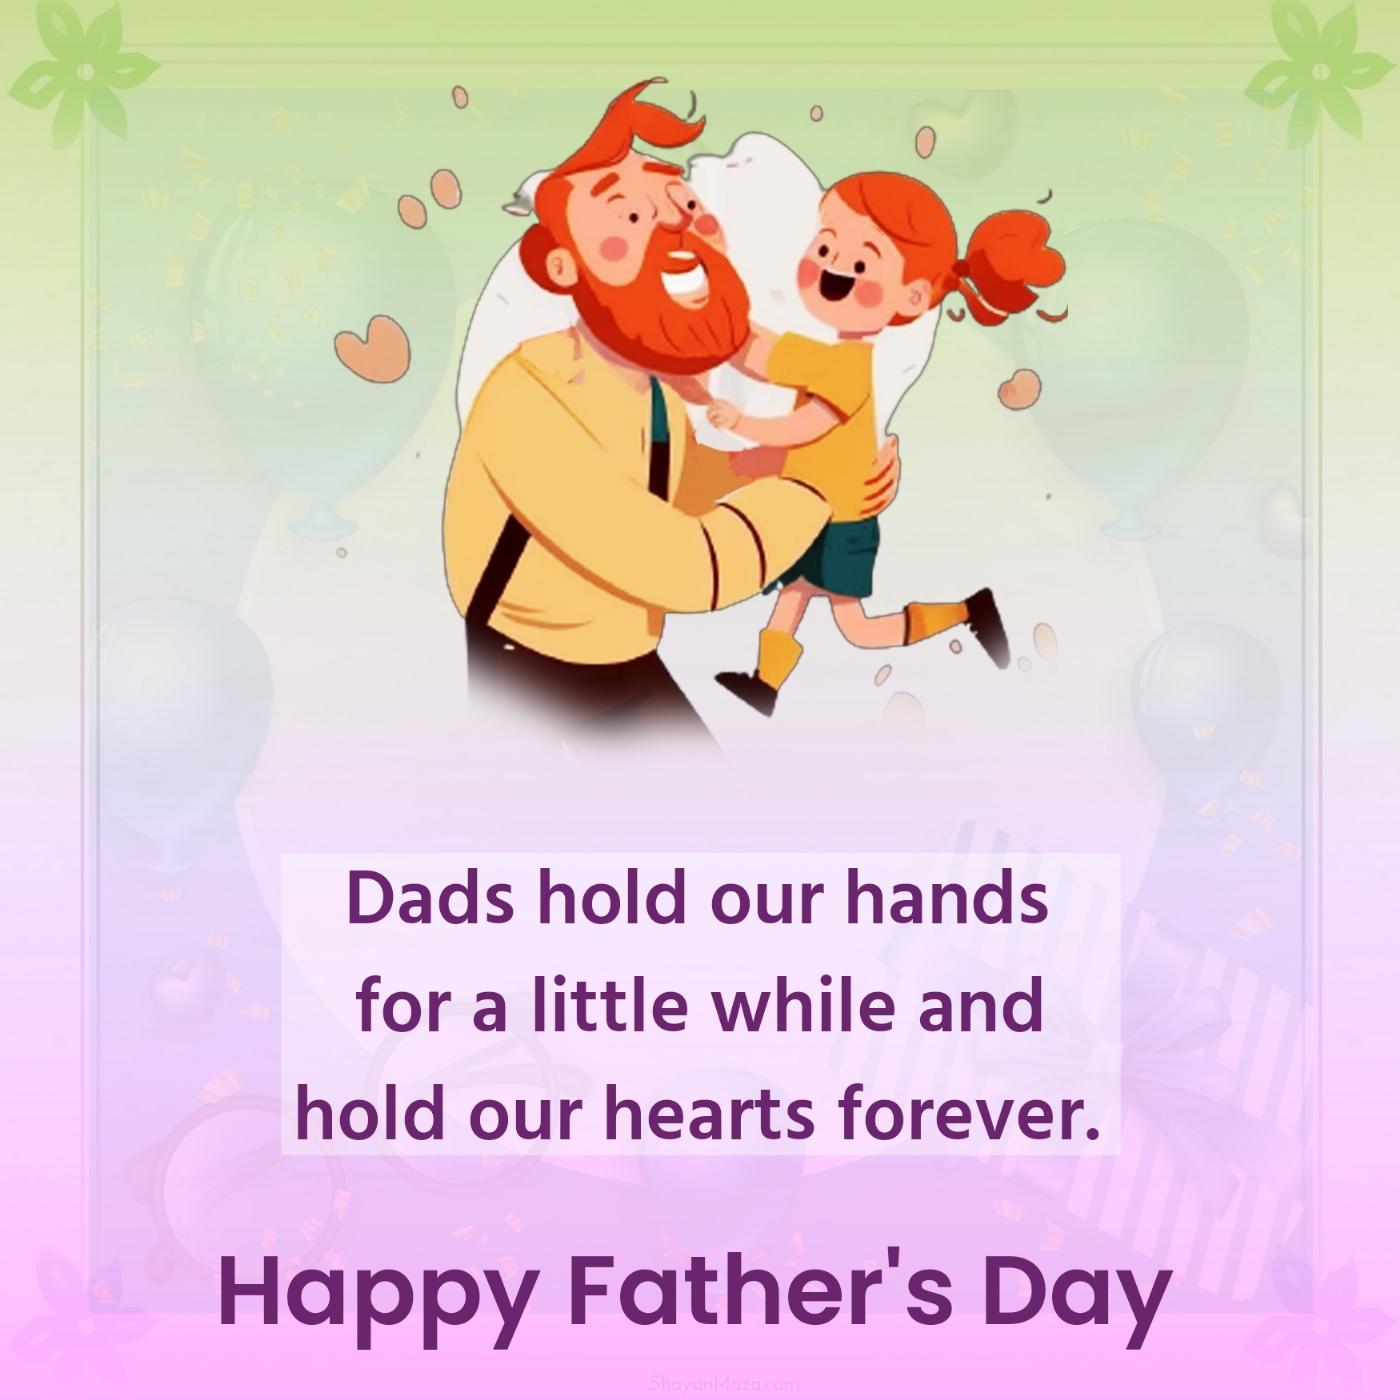 Dads hold our hands for a little while